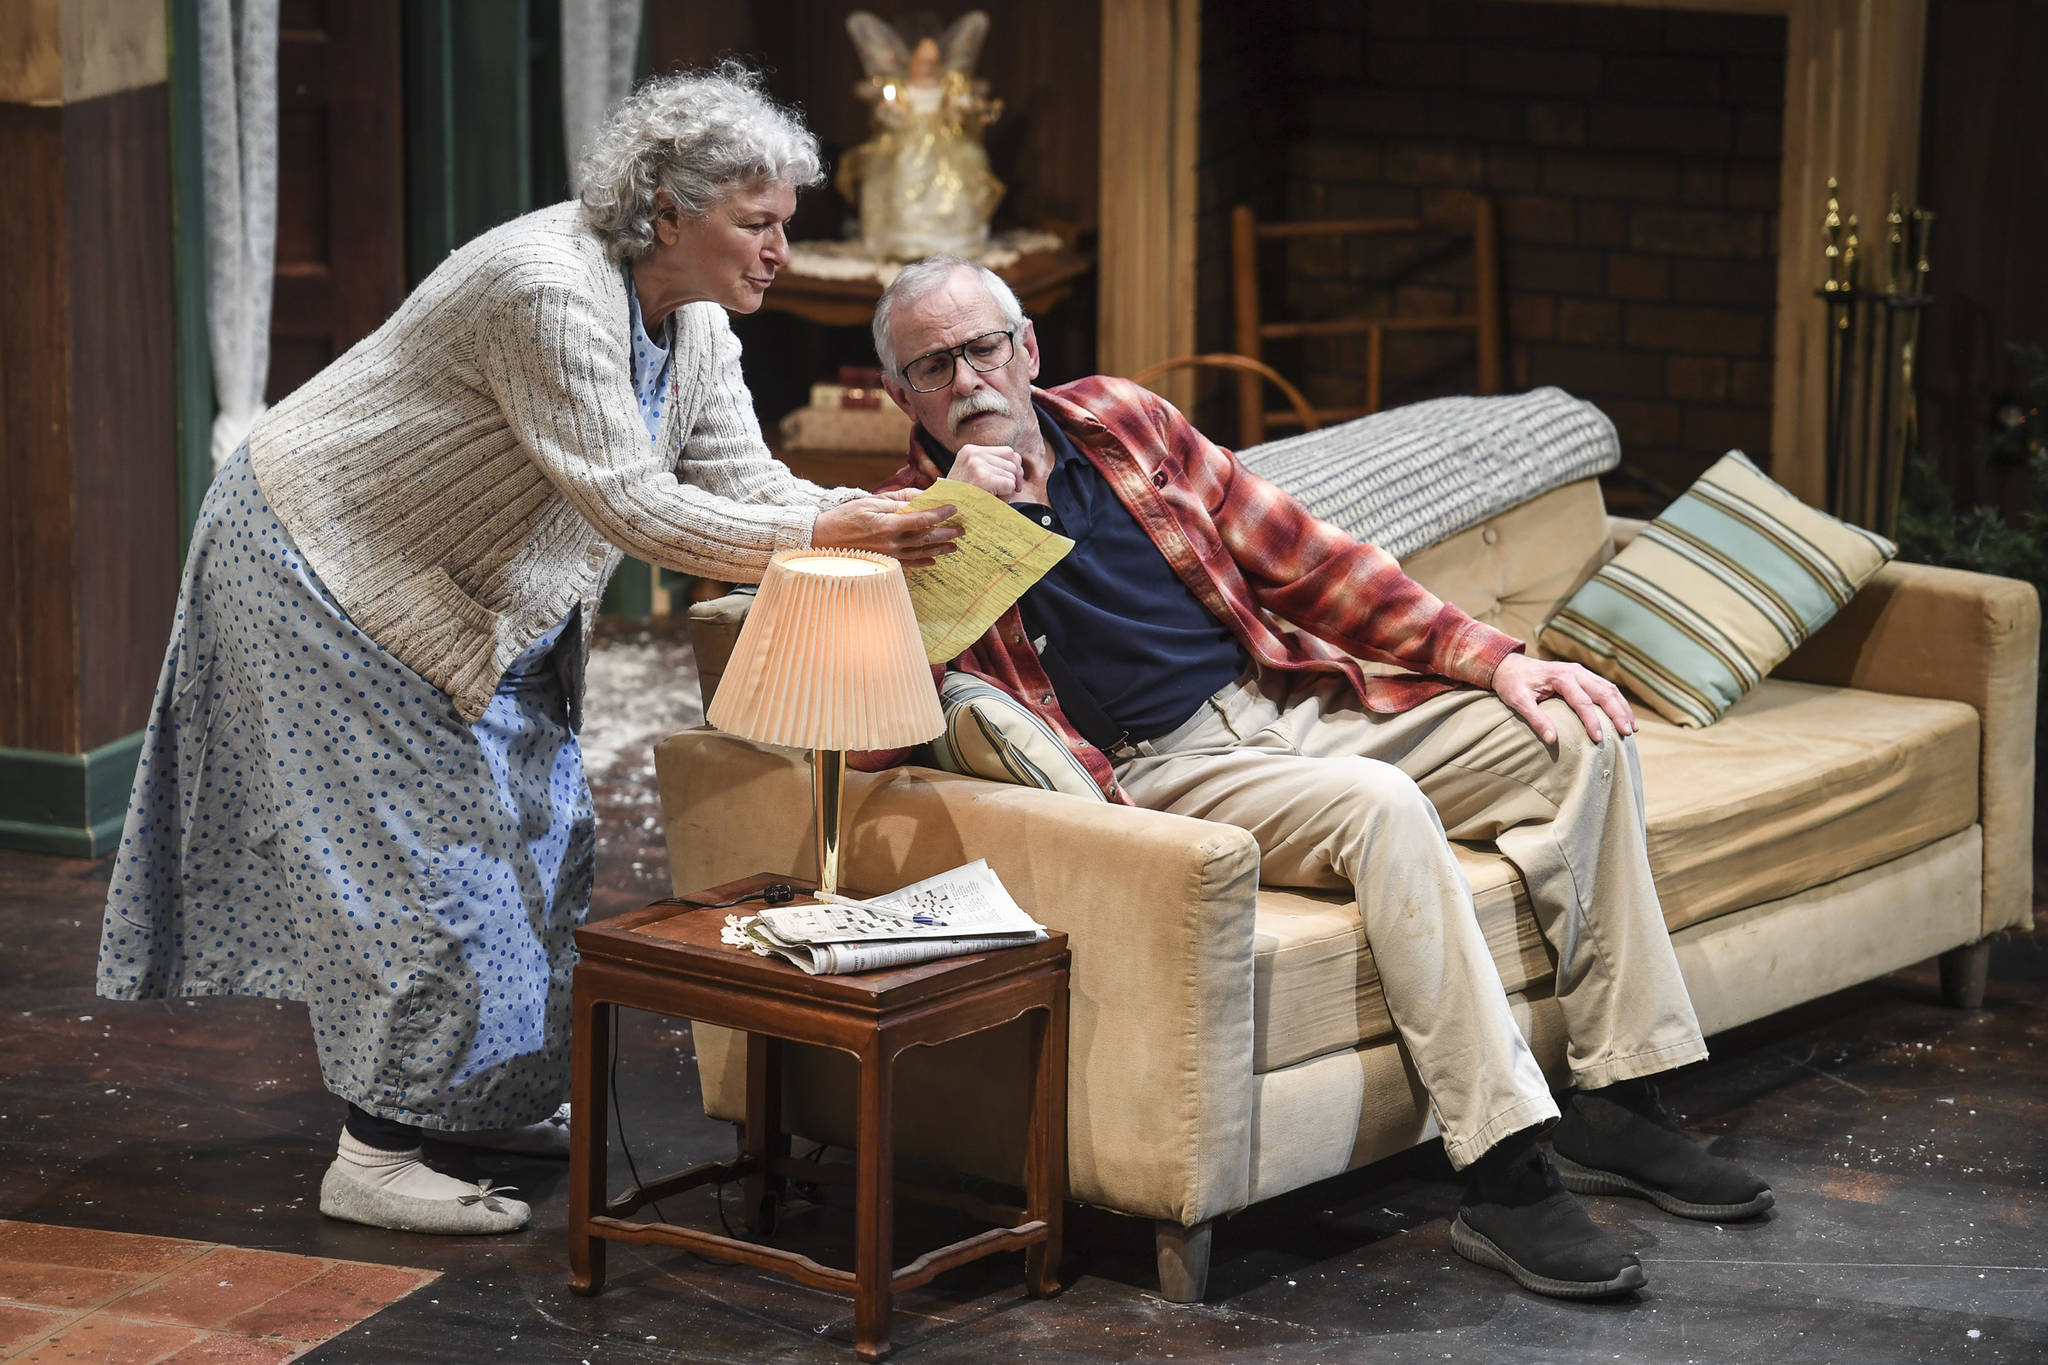 Clifford, played by Charlie Cardwell, and Minnie, played by Angelina Fiordellisi, rehearse in Perseverance Theatre’s production of “With” by playwright Carter Lewis on Tuesday, Nov. 19, 2019. (Michael Penn | Juneau Empire)